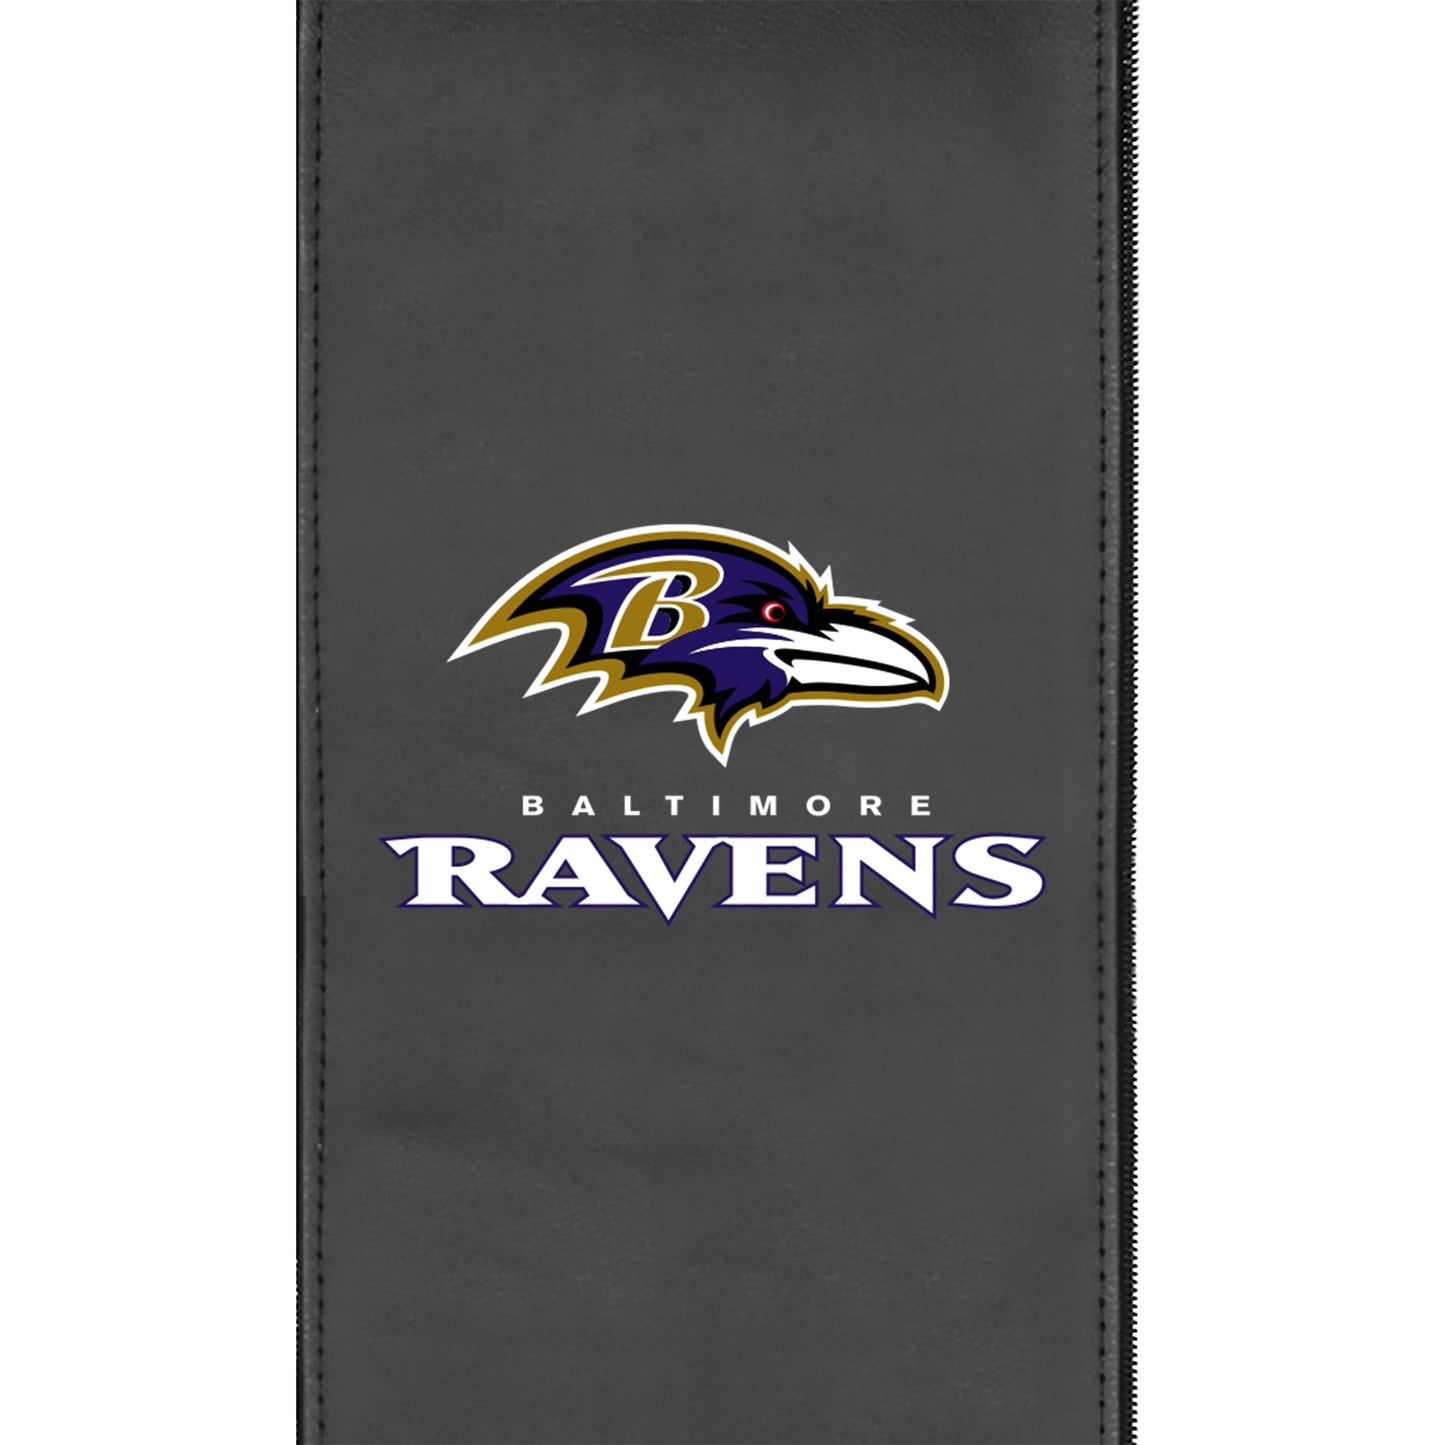 Relax Home Theater Recliner with Baltimore Ravens Secondary Logo